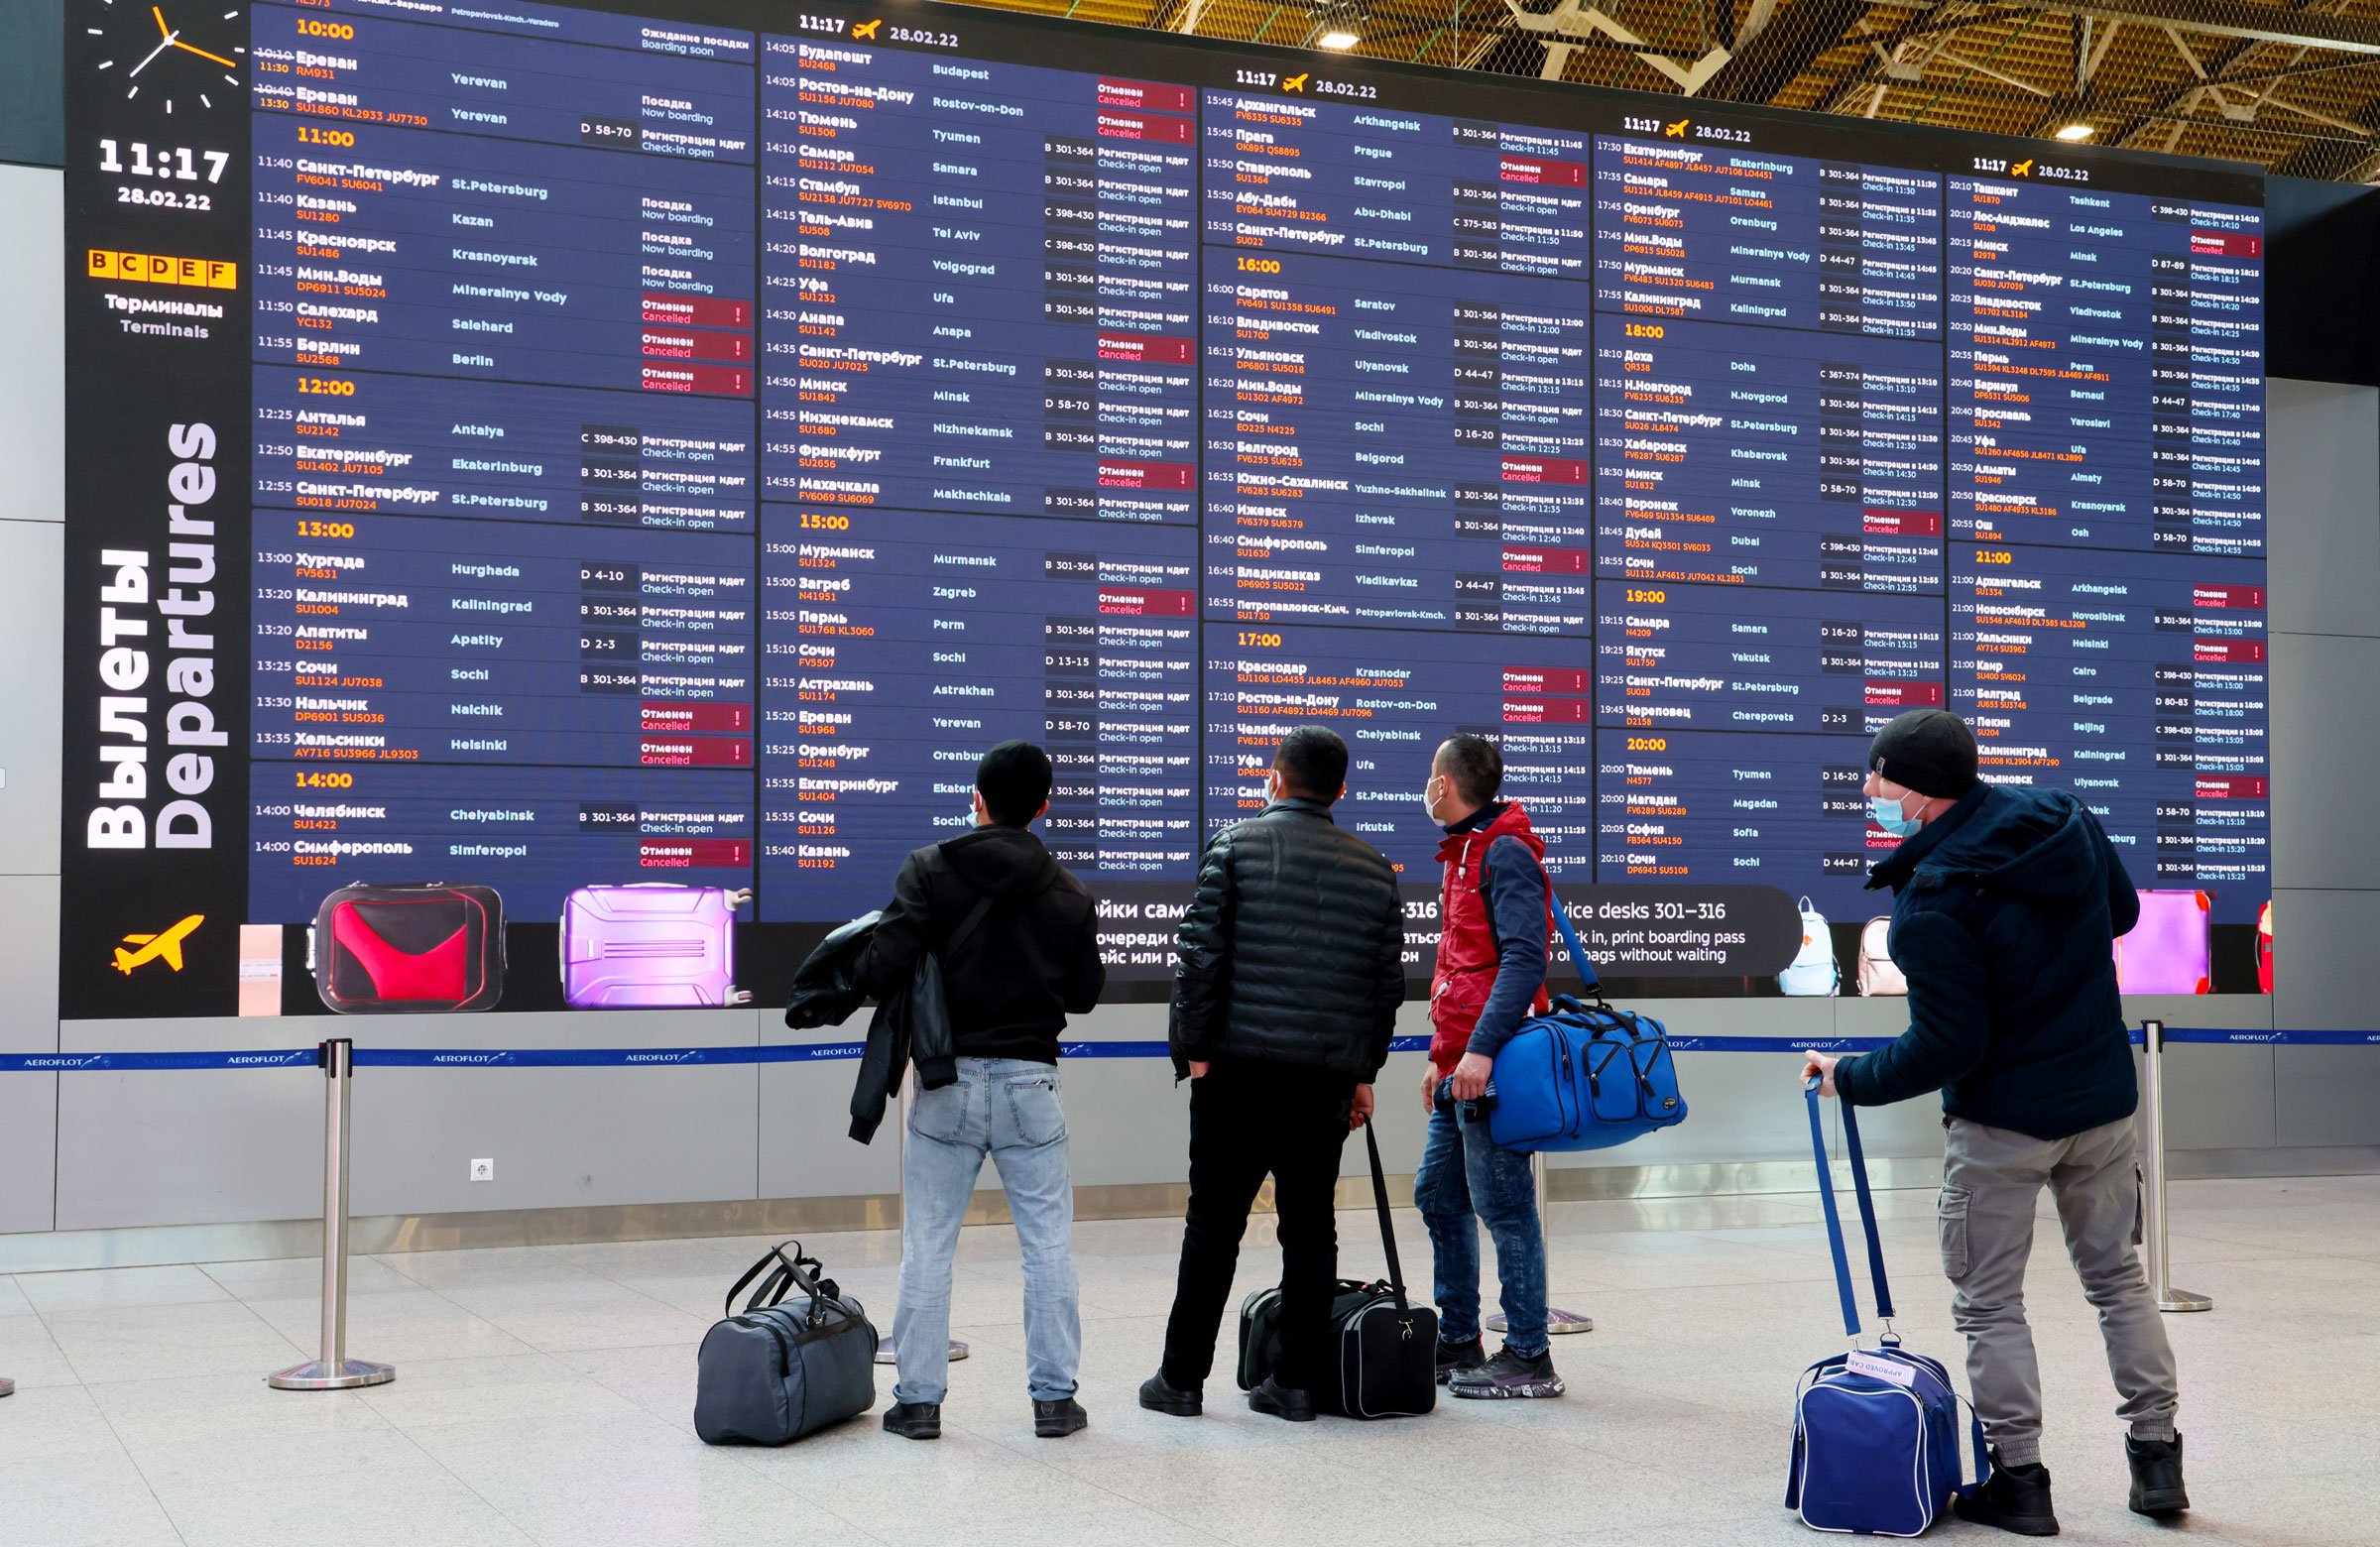 Travelers look at a departures board Monday at the Sheremetyevo International Airport in Moscow. The flights in red were canceled.